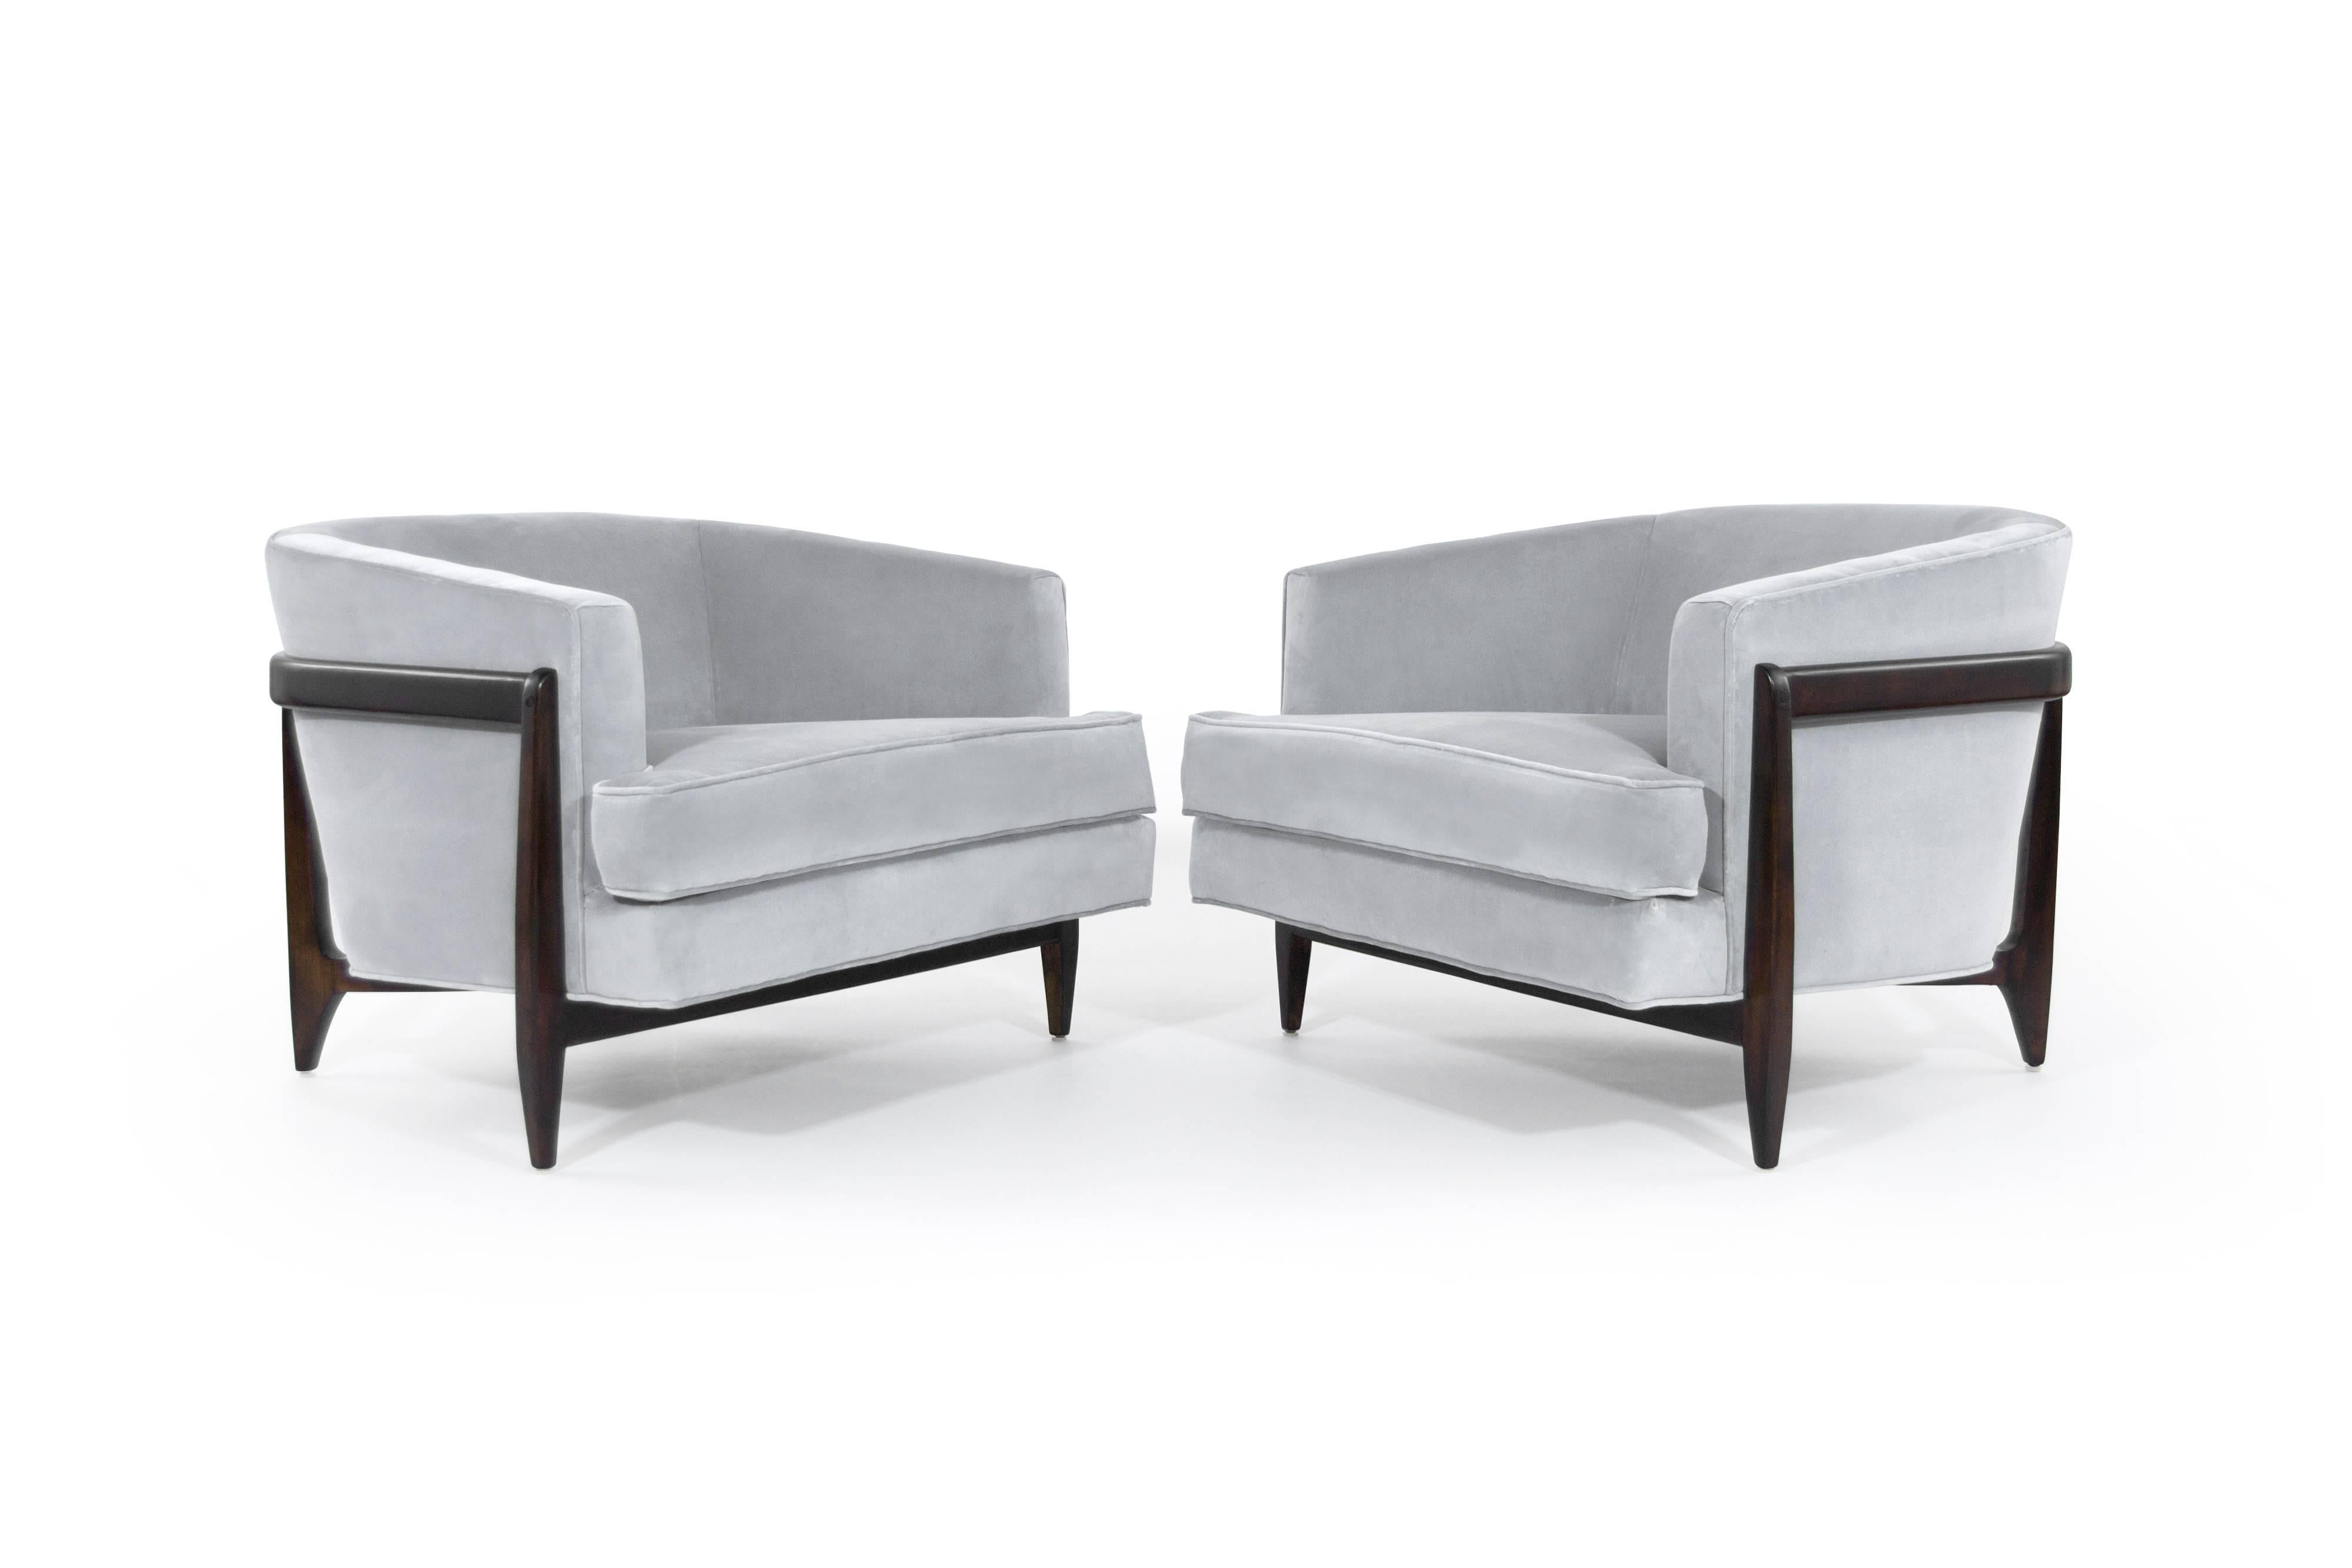 Stunning pair of lounge chairs featuring fully restored sculptural walnut frames, newly upholstered in grey velvet. Low and profile, makes this pair extremely comfortable.